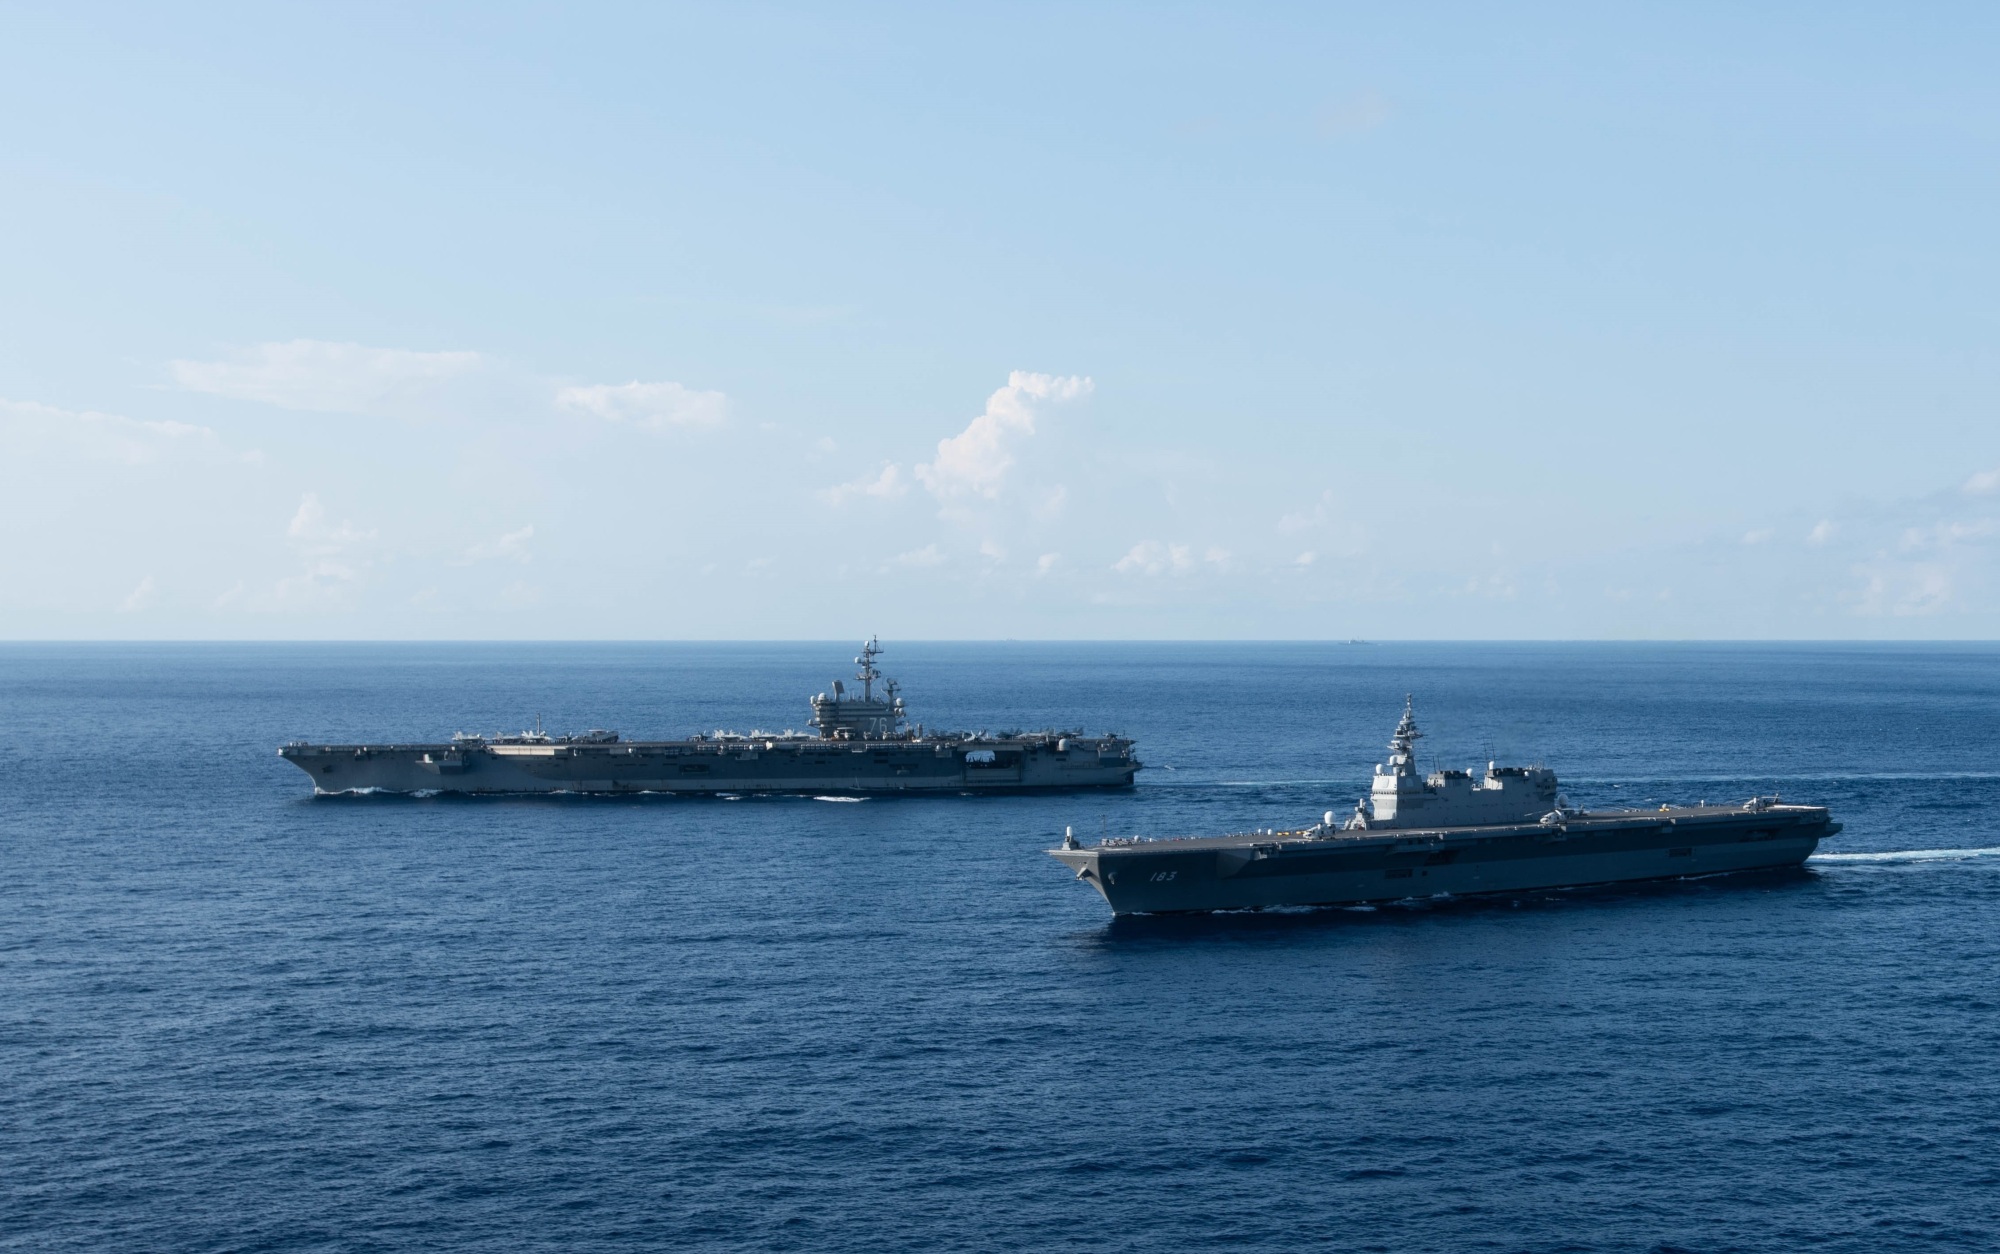 The USS Ronald Reagan sails alongside the Maritime Self-Defense Force's Izumo helicopter carrier (front) while conducting operations in the South China Sea on June 19. | U.S. NAVY